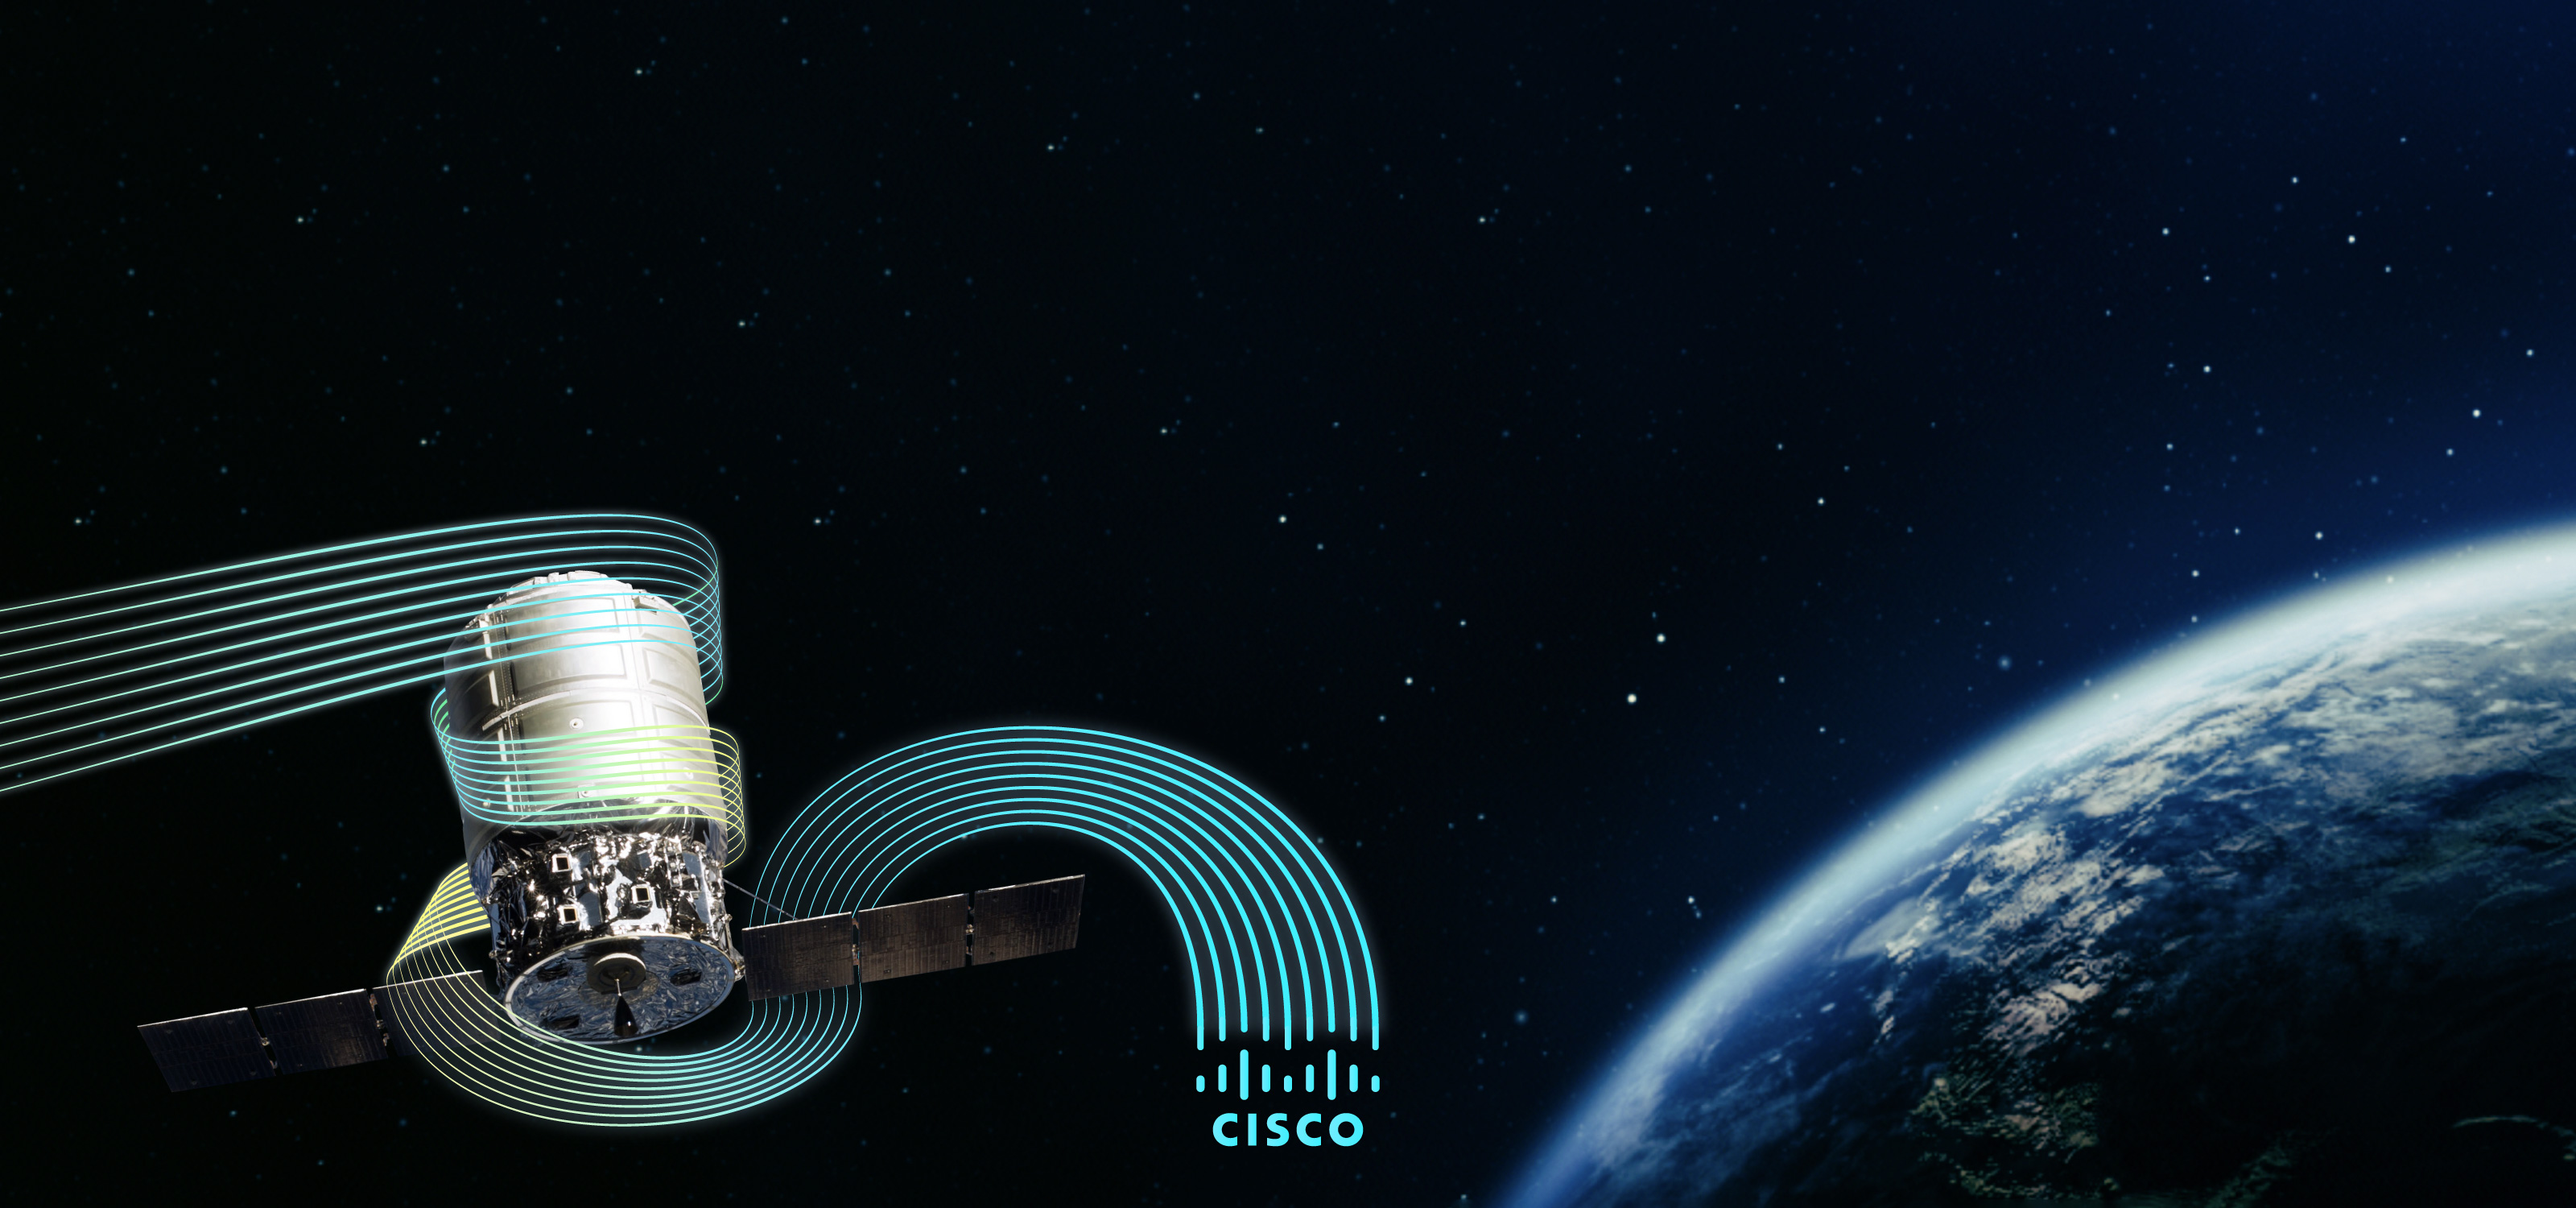 Satellite in space with glow of earth in the background with Cisco art and logo to represent network security.